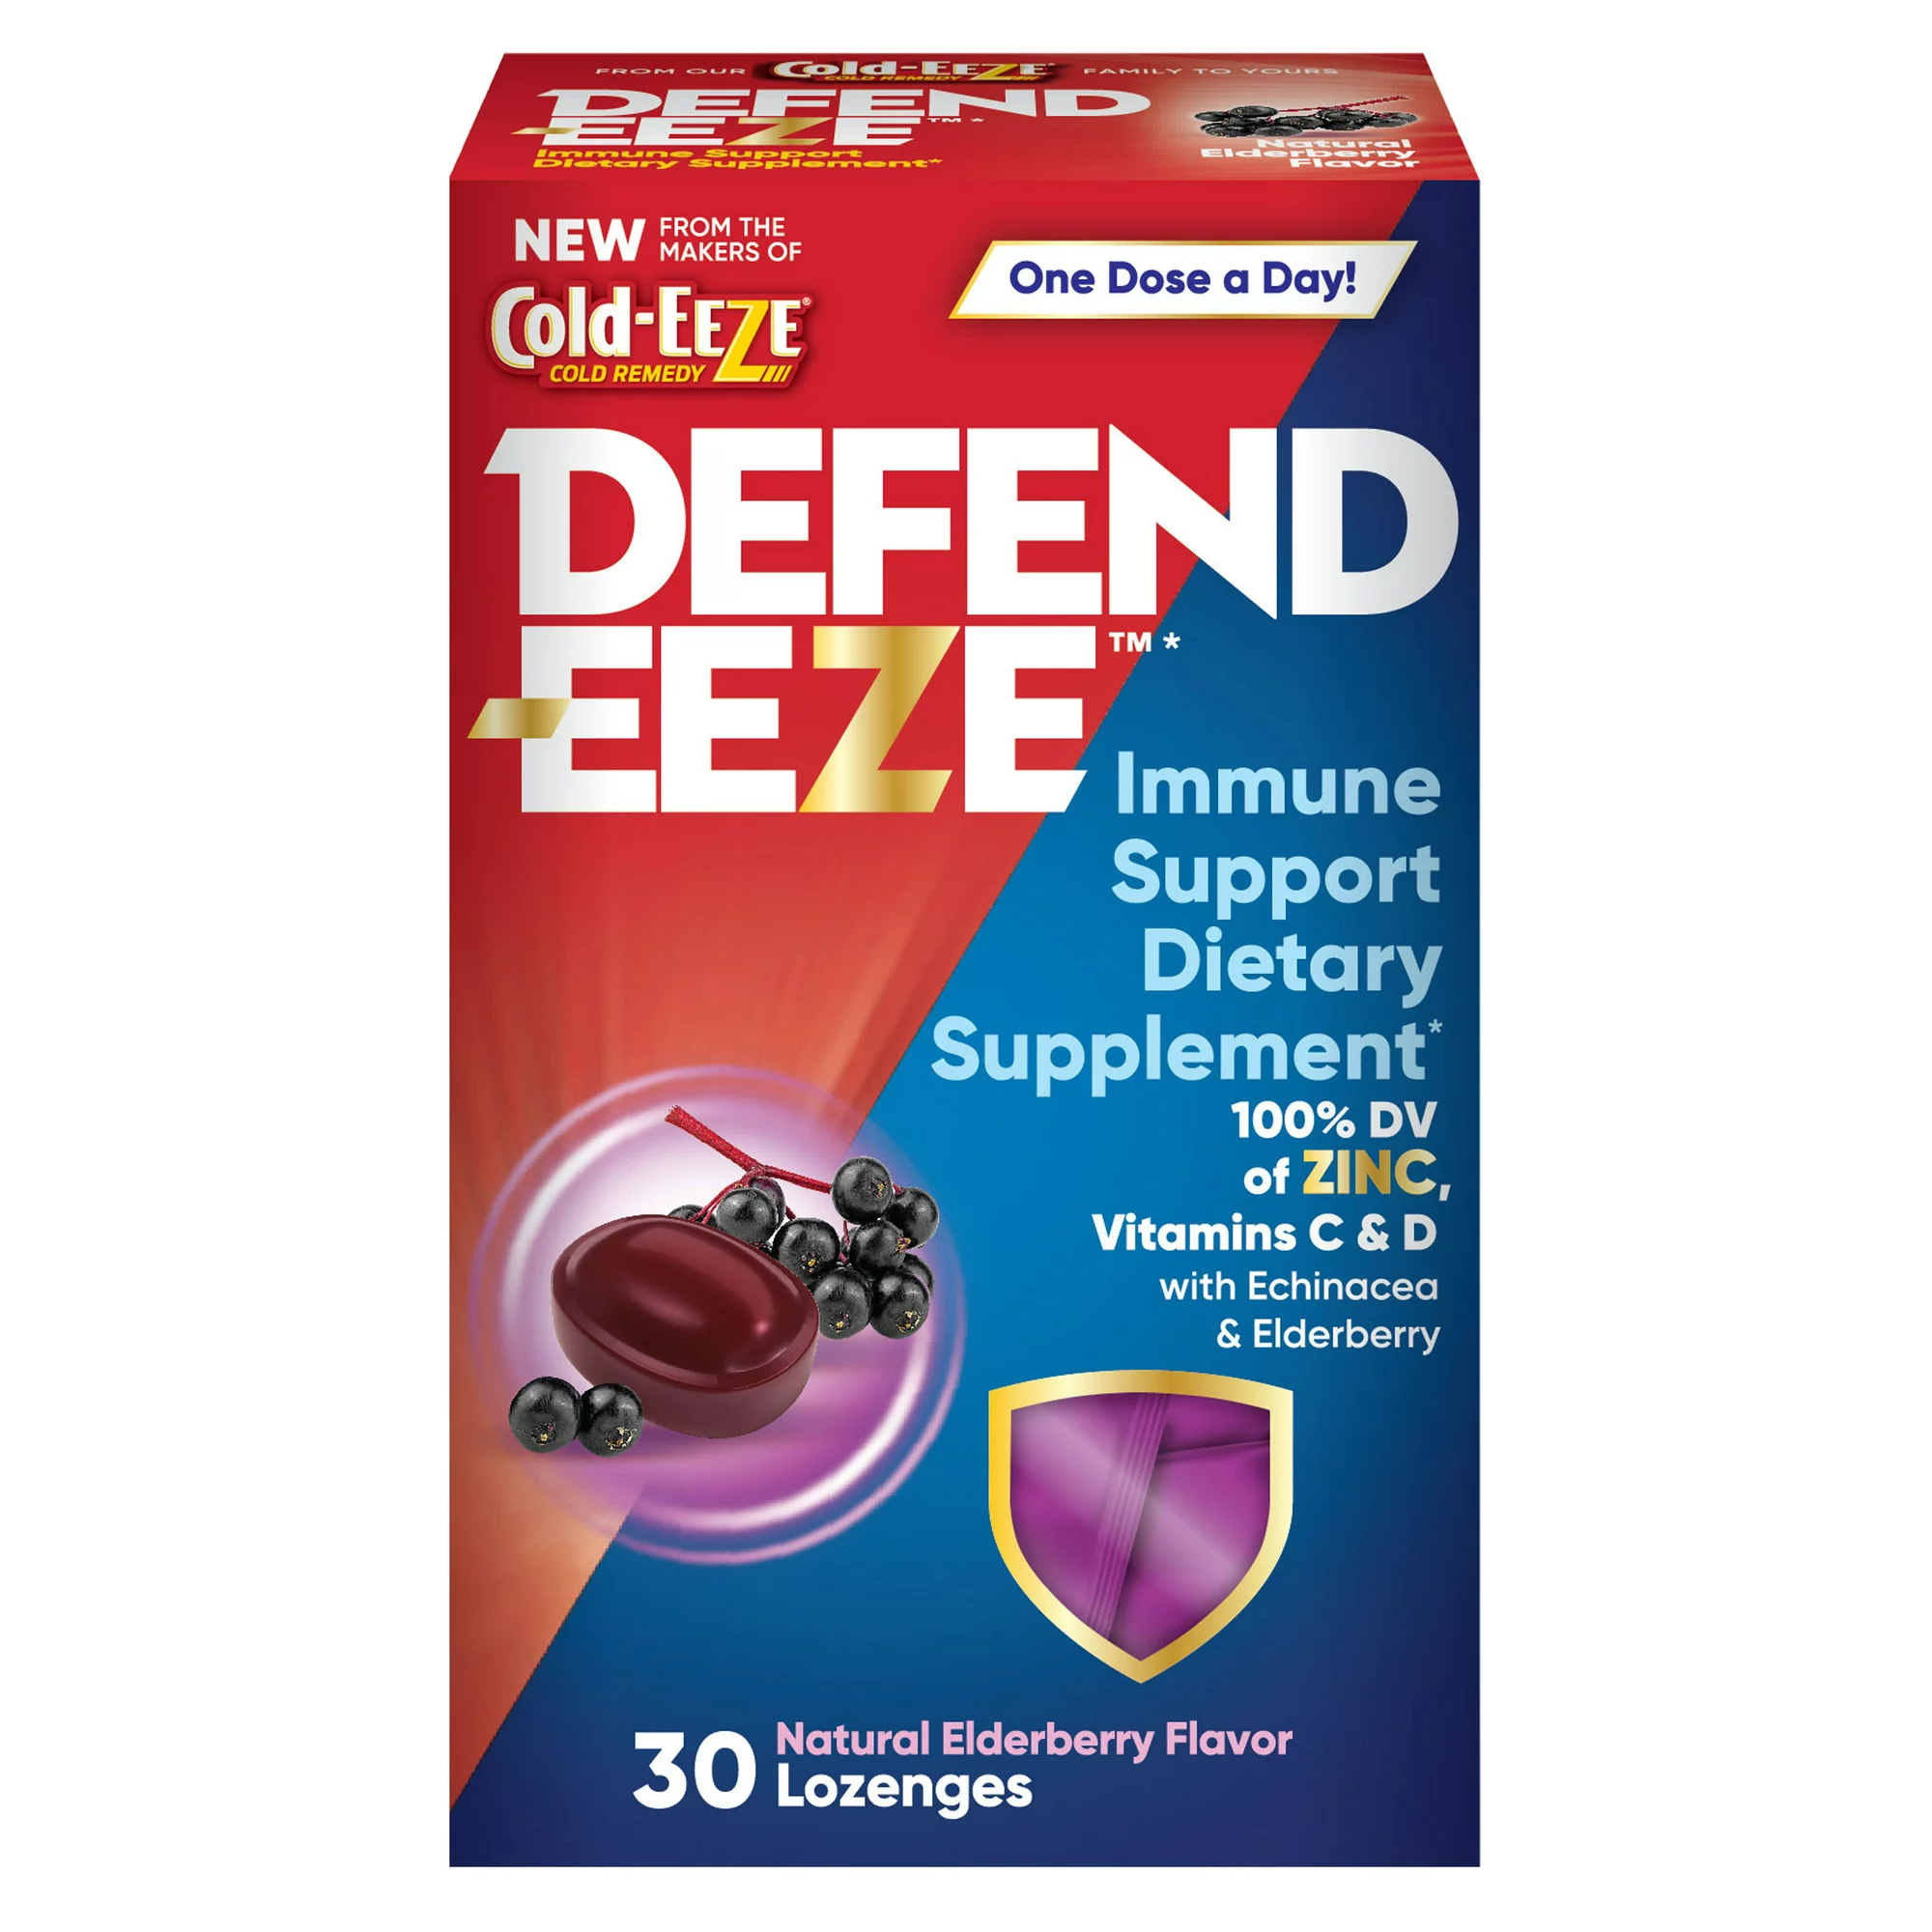 Supercharge your immune system with DEFEND EEZE products!